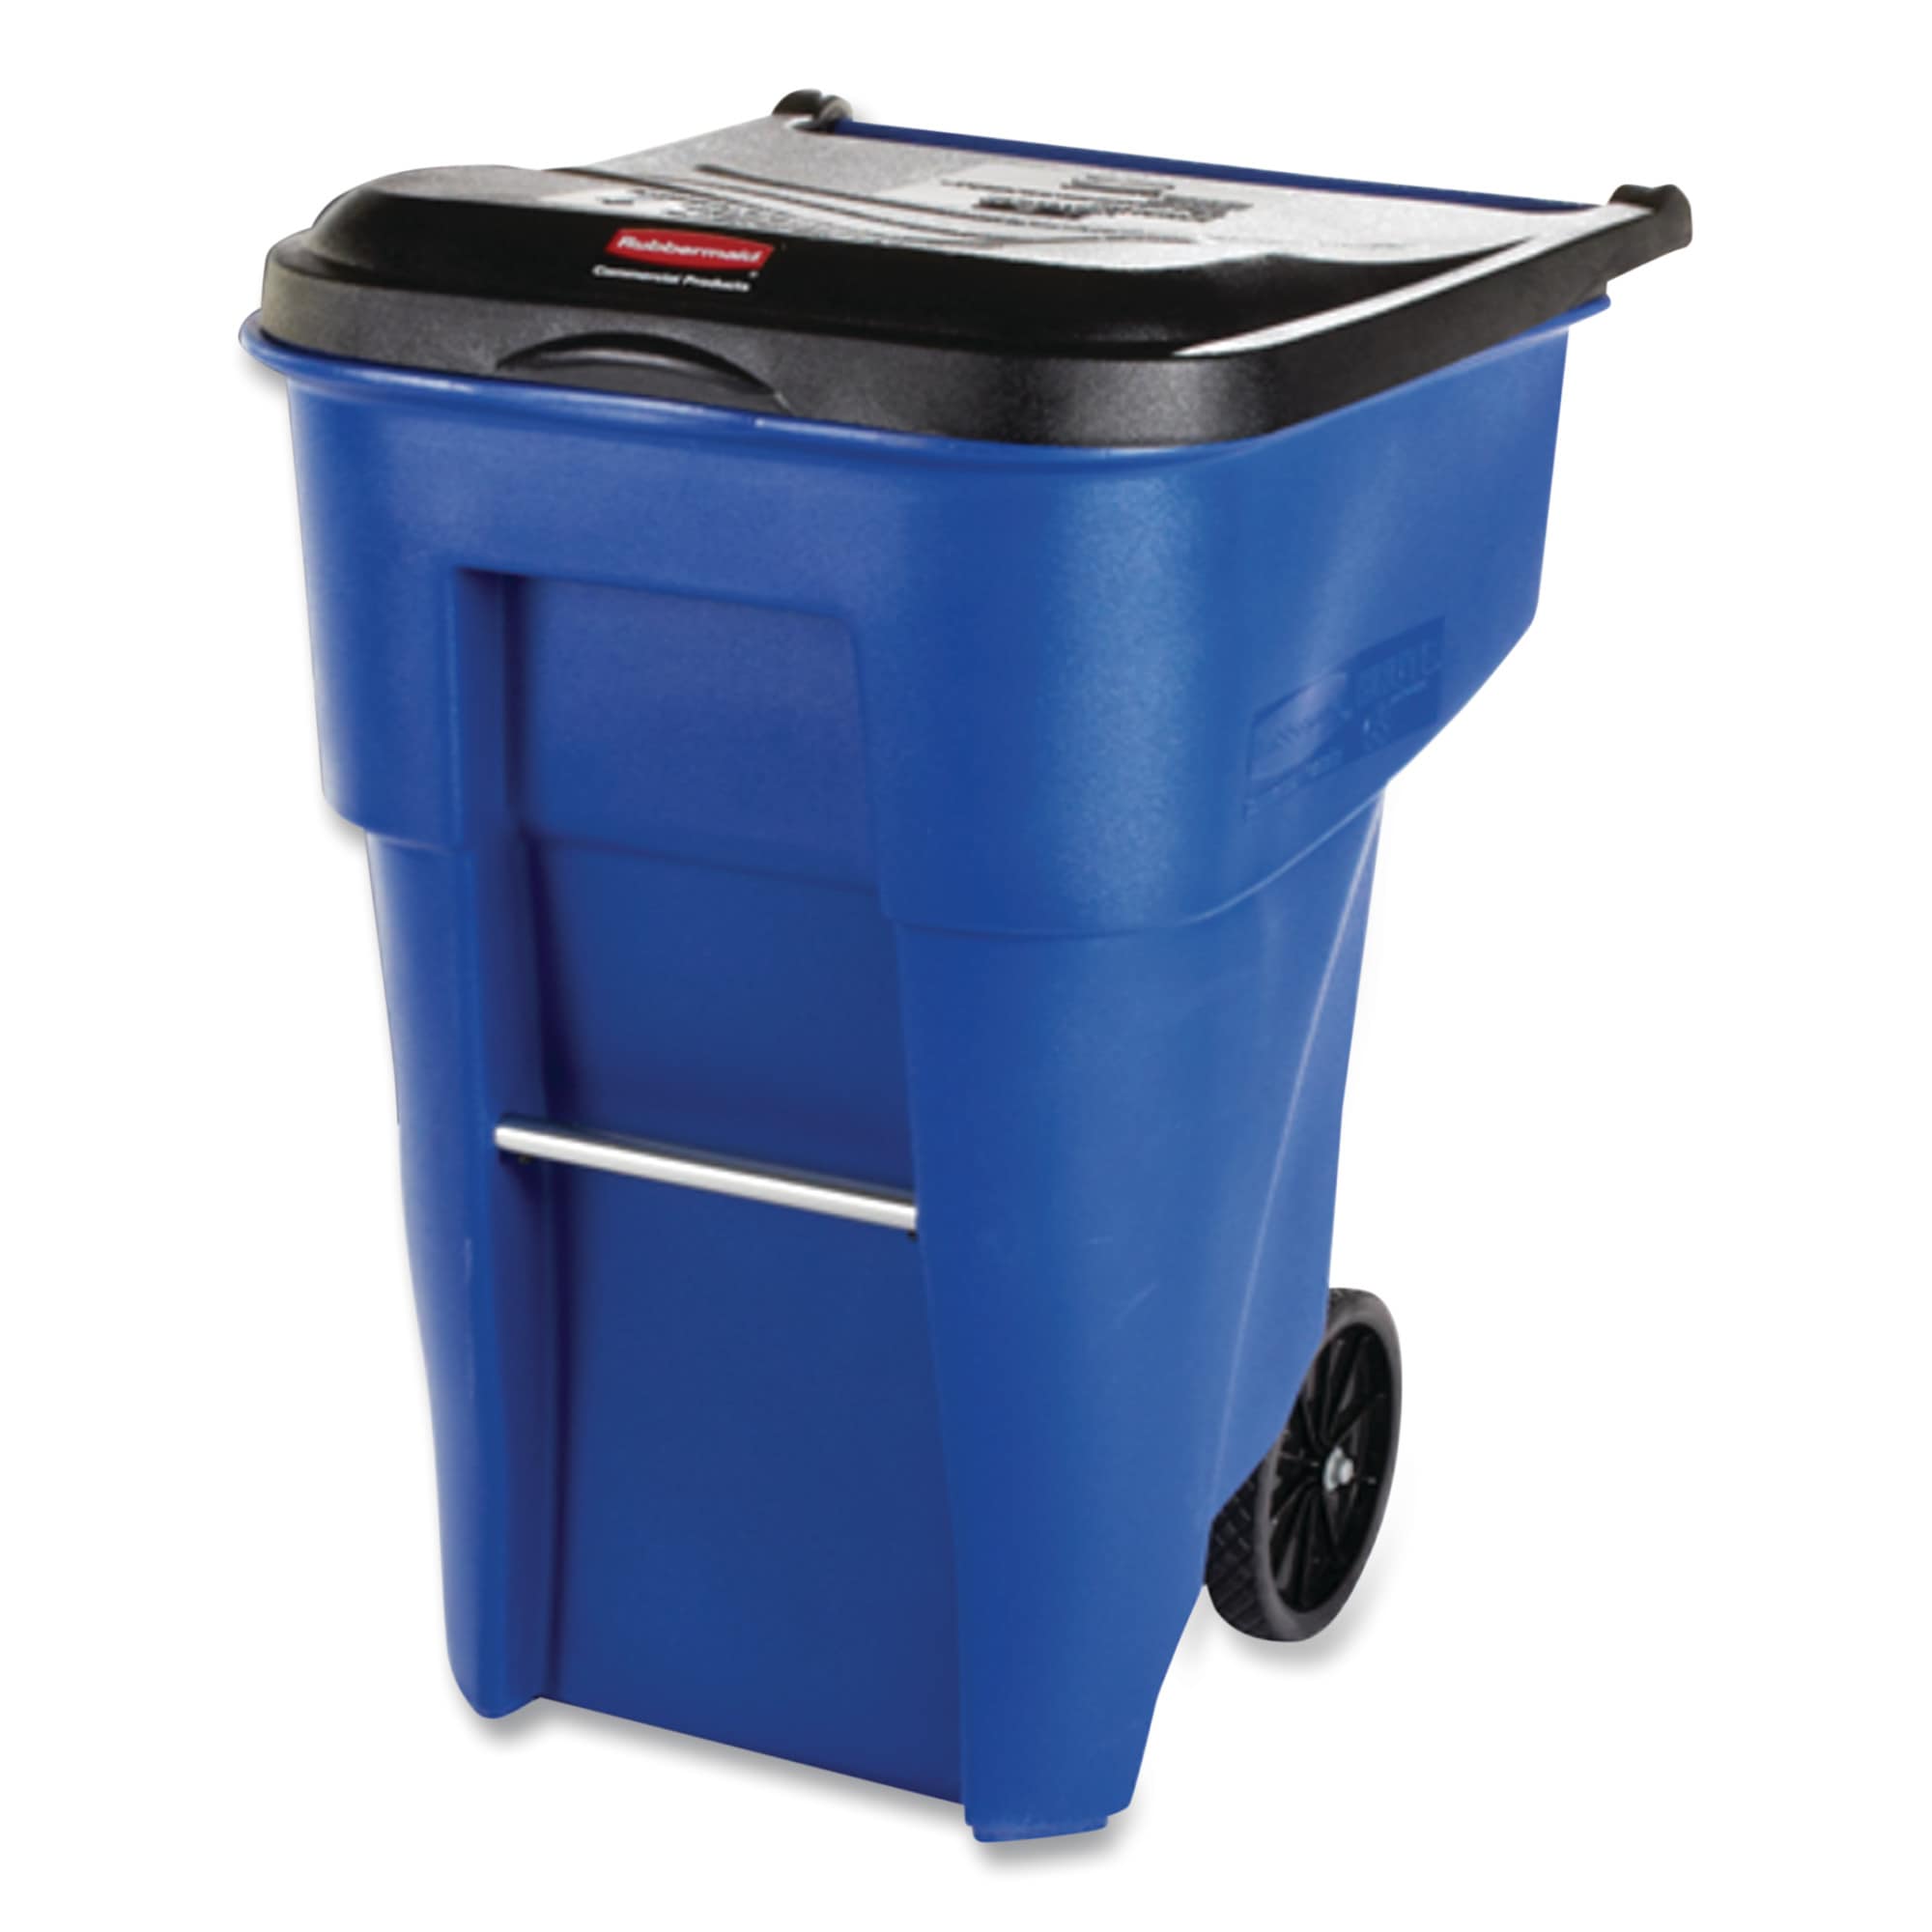 Rubbermaid Waste Receptacles, Garbage Cans, Trash Cans & Refuse